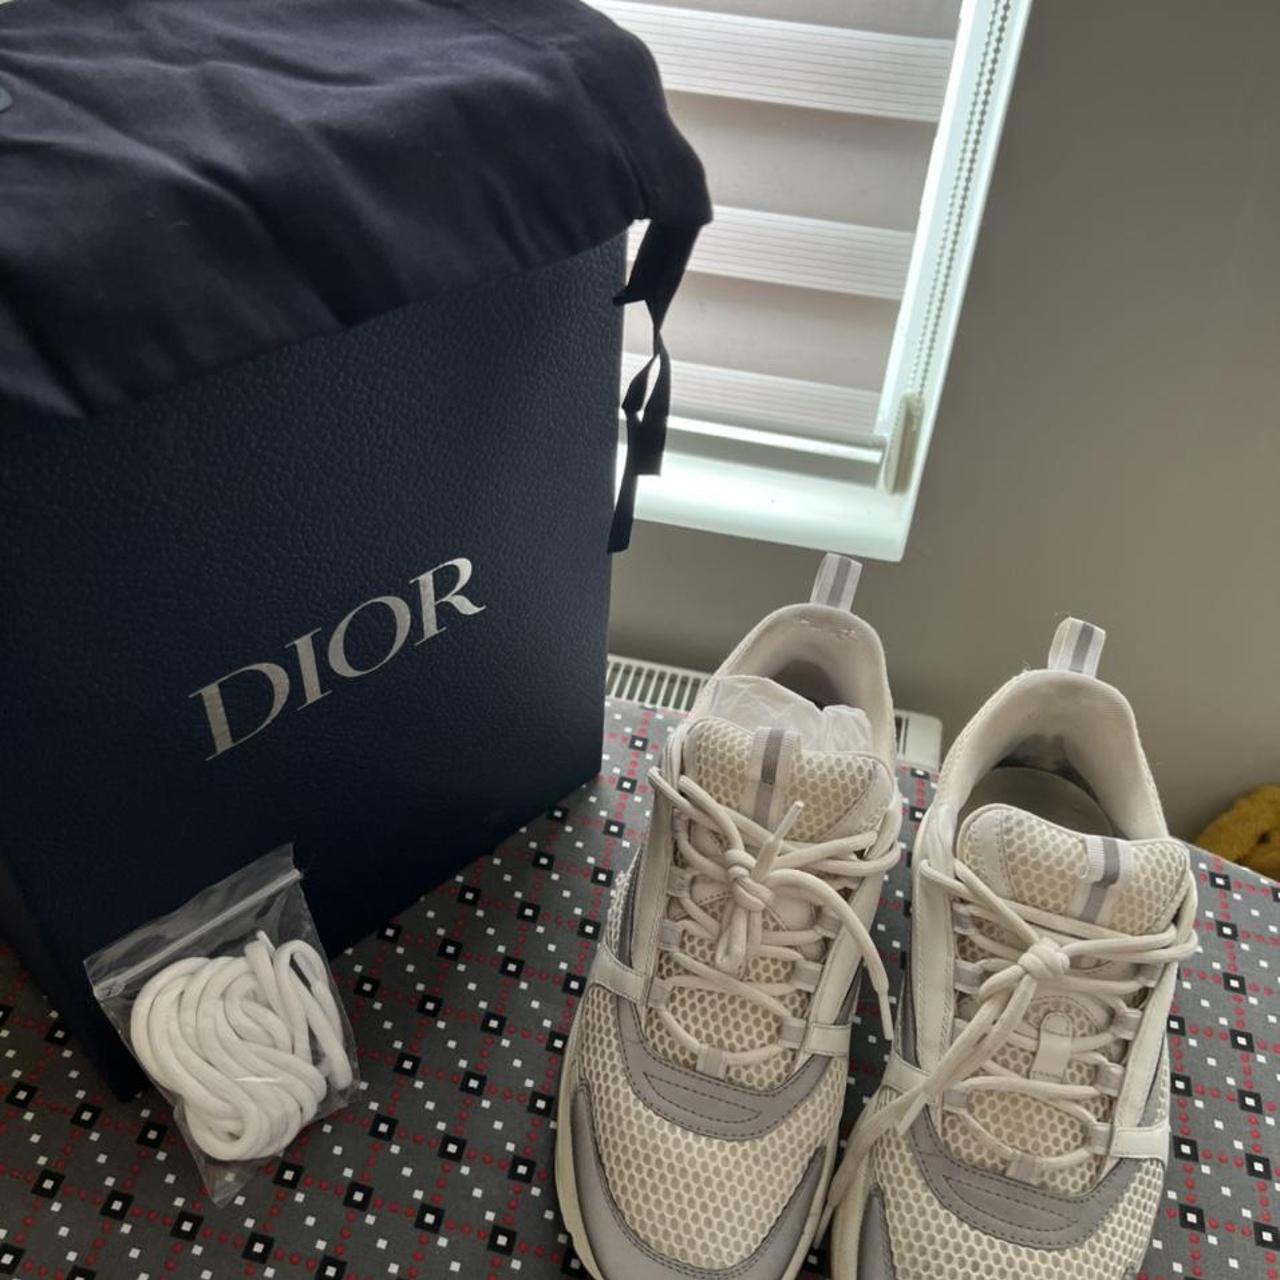 Dior runners shoes size 9 UK white colour - Depop